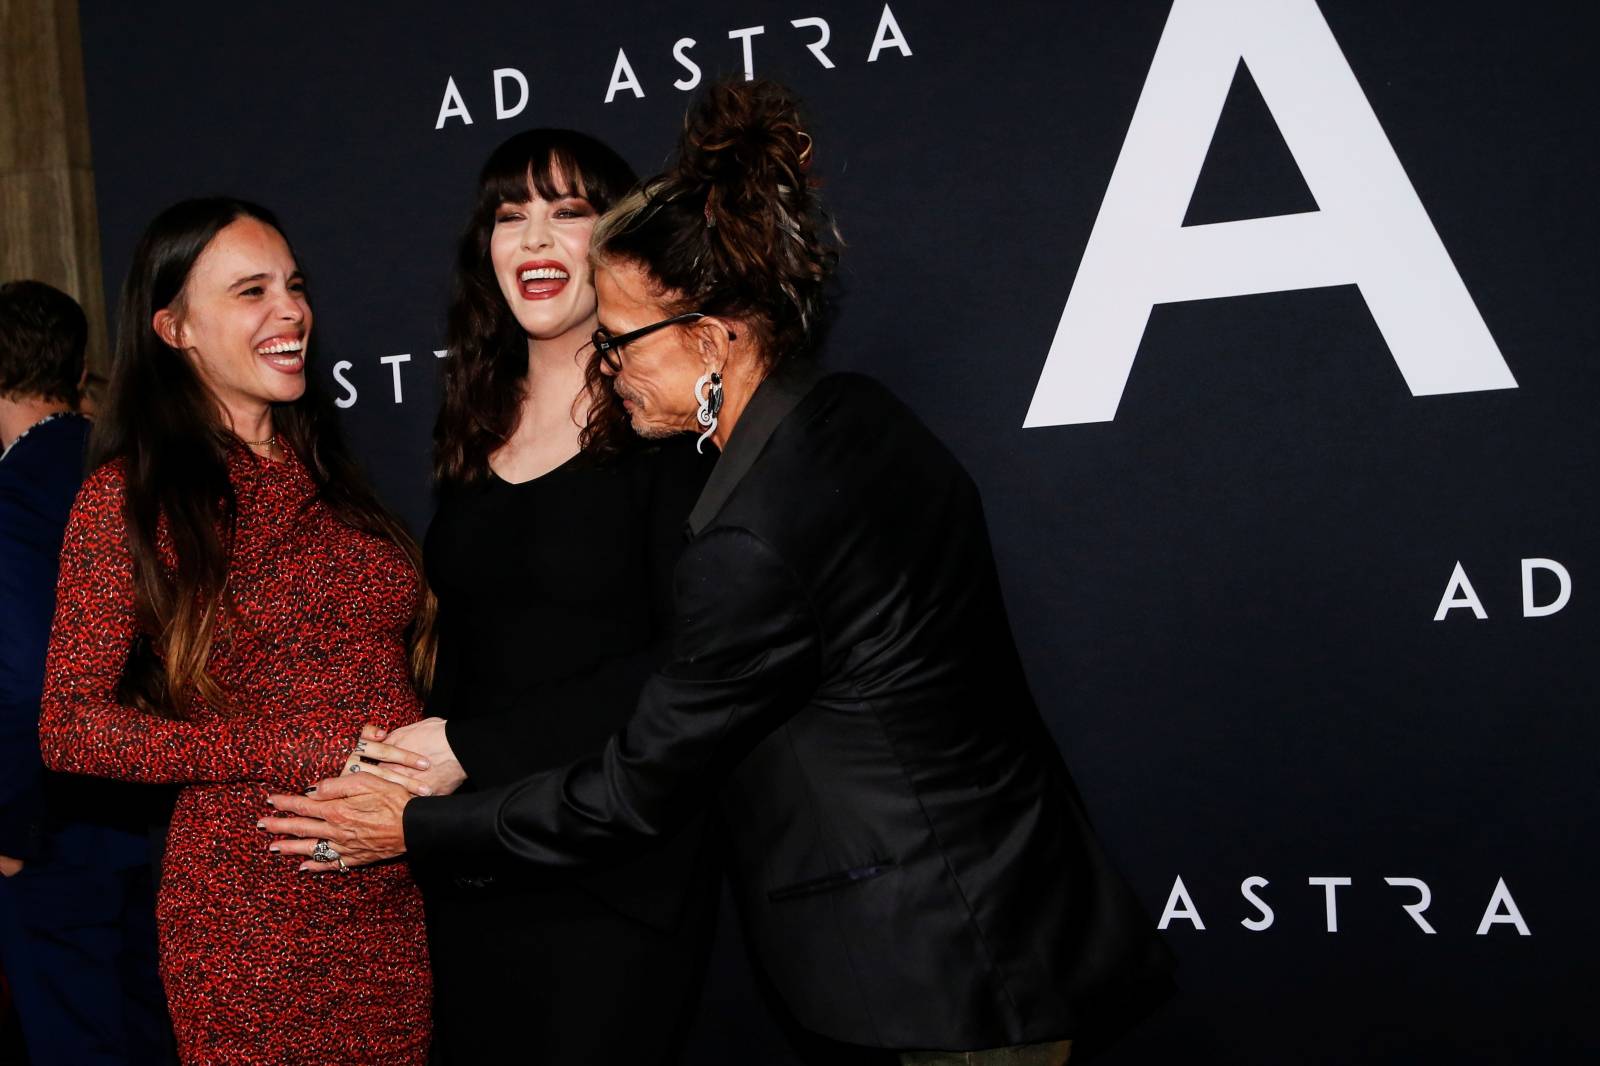 Premiere for the film "Ad Astra" in Los Angeles